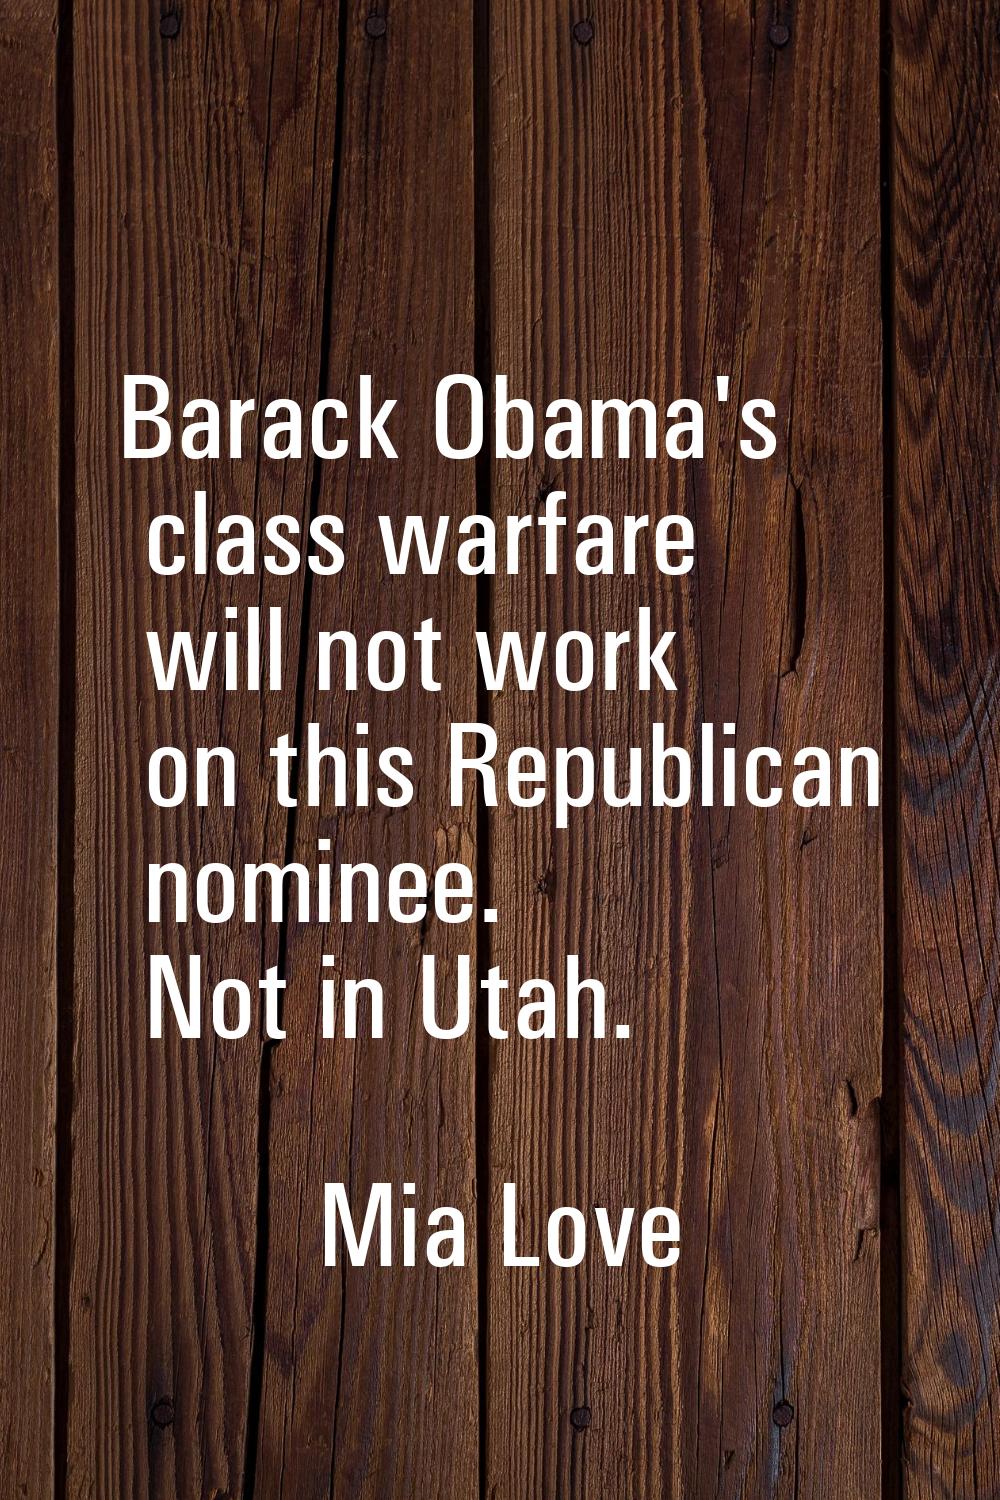 Barack Obama's class warfare will not work on this Republican nominee. Not in Utah.